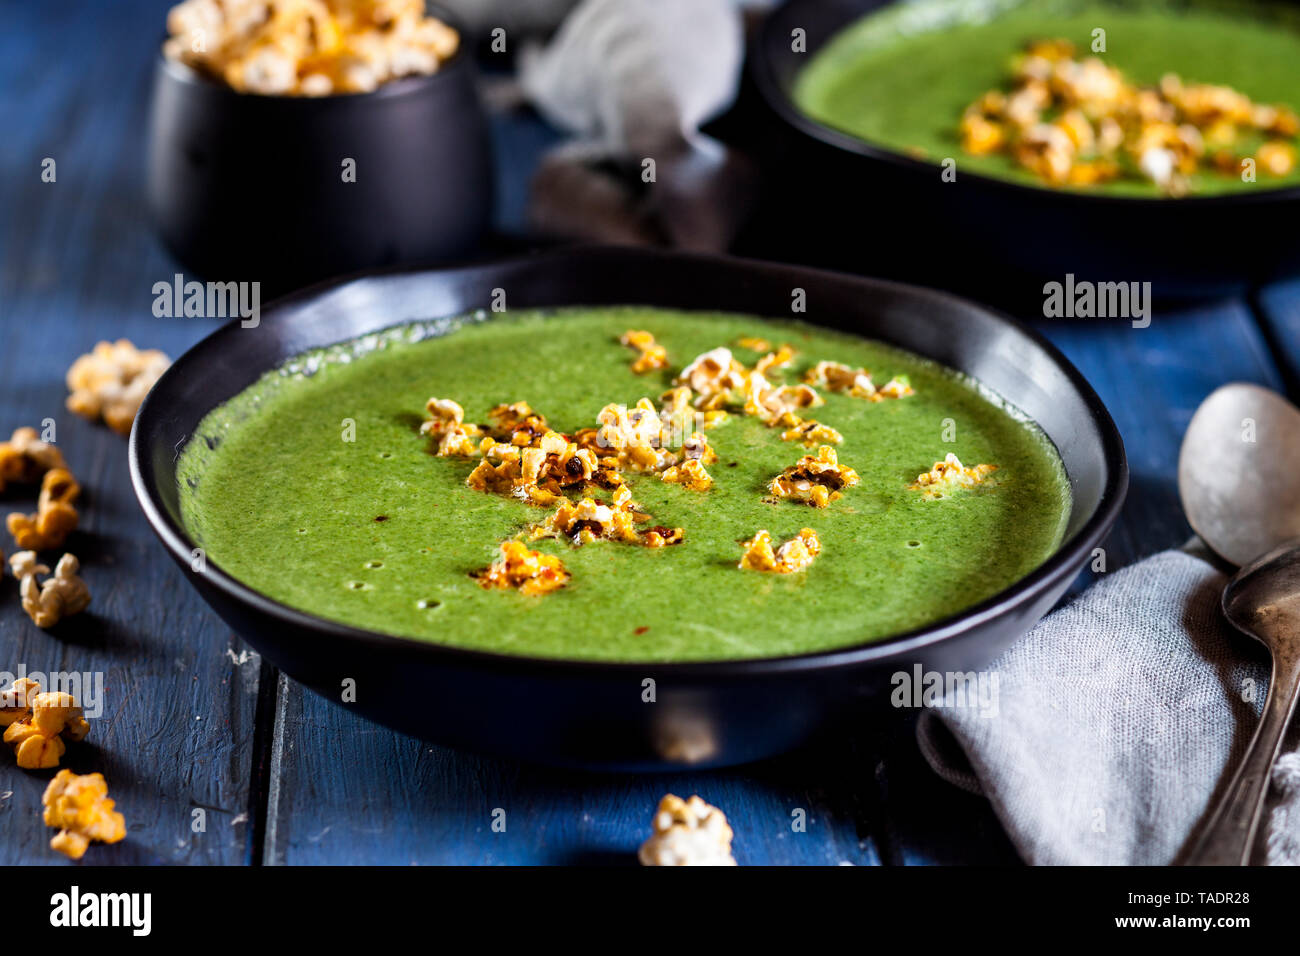 Vegan green vegetable soup with spinach, leek and peas, chili popcorn Stock Photo